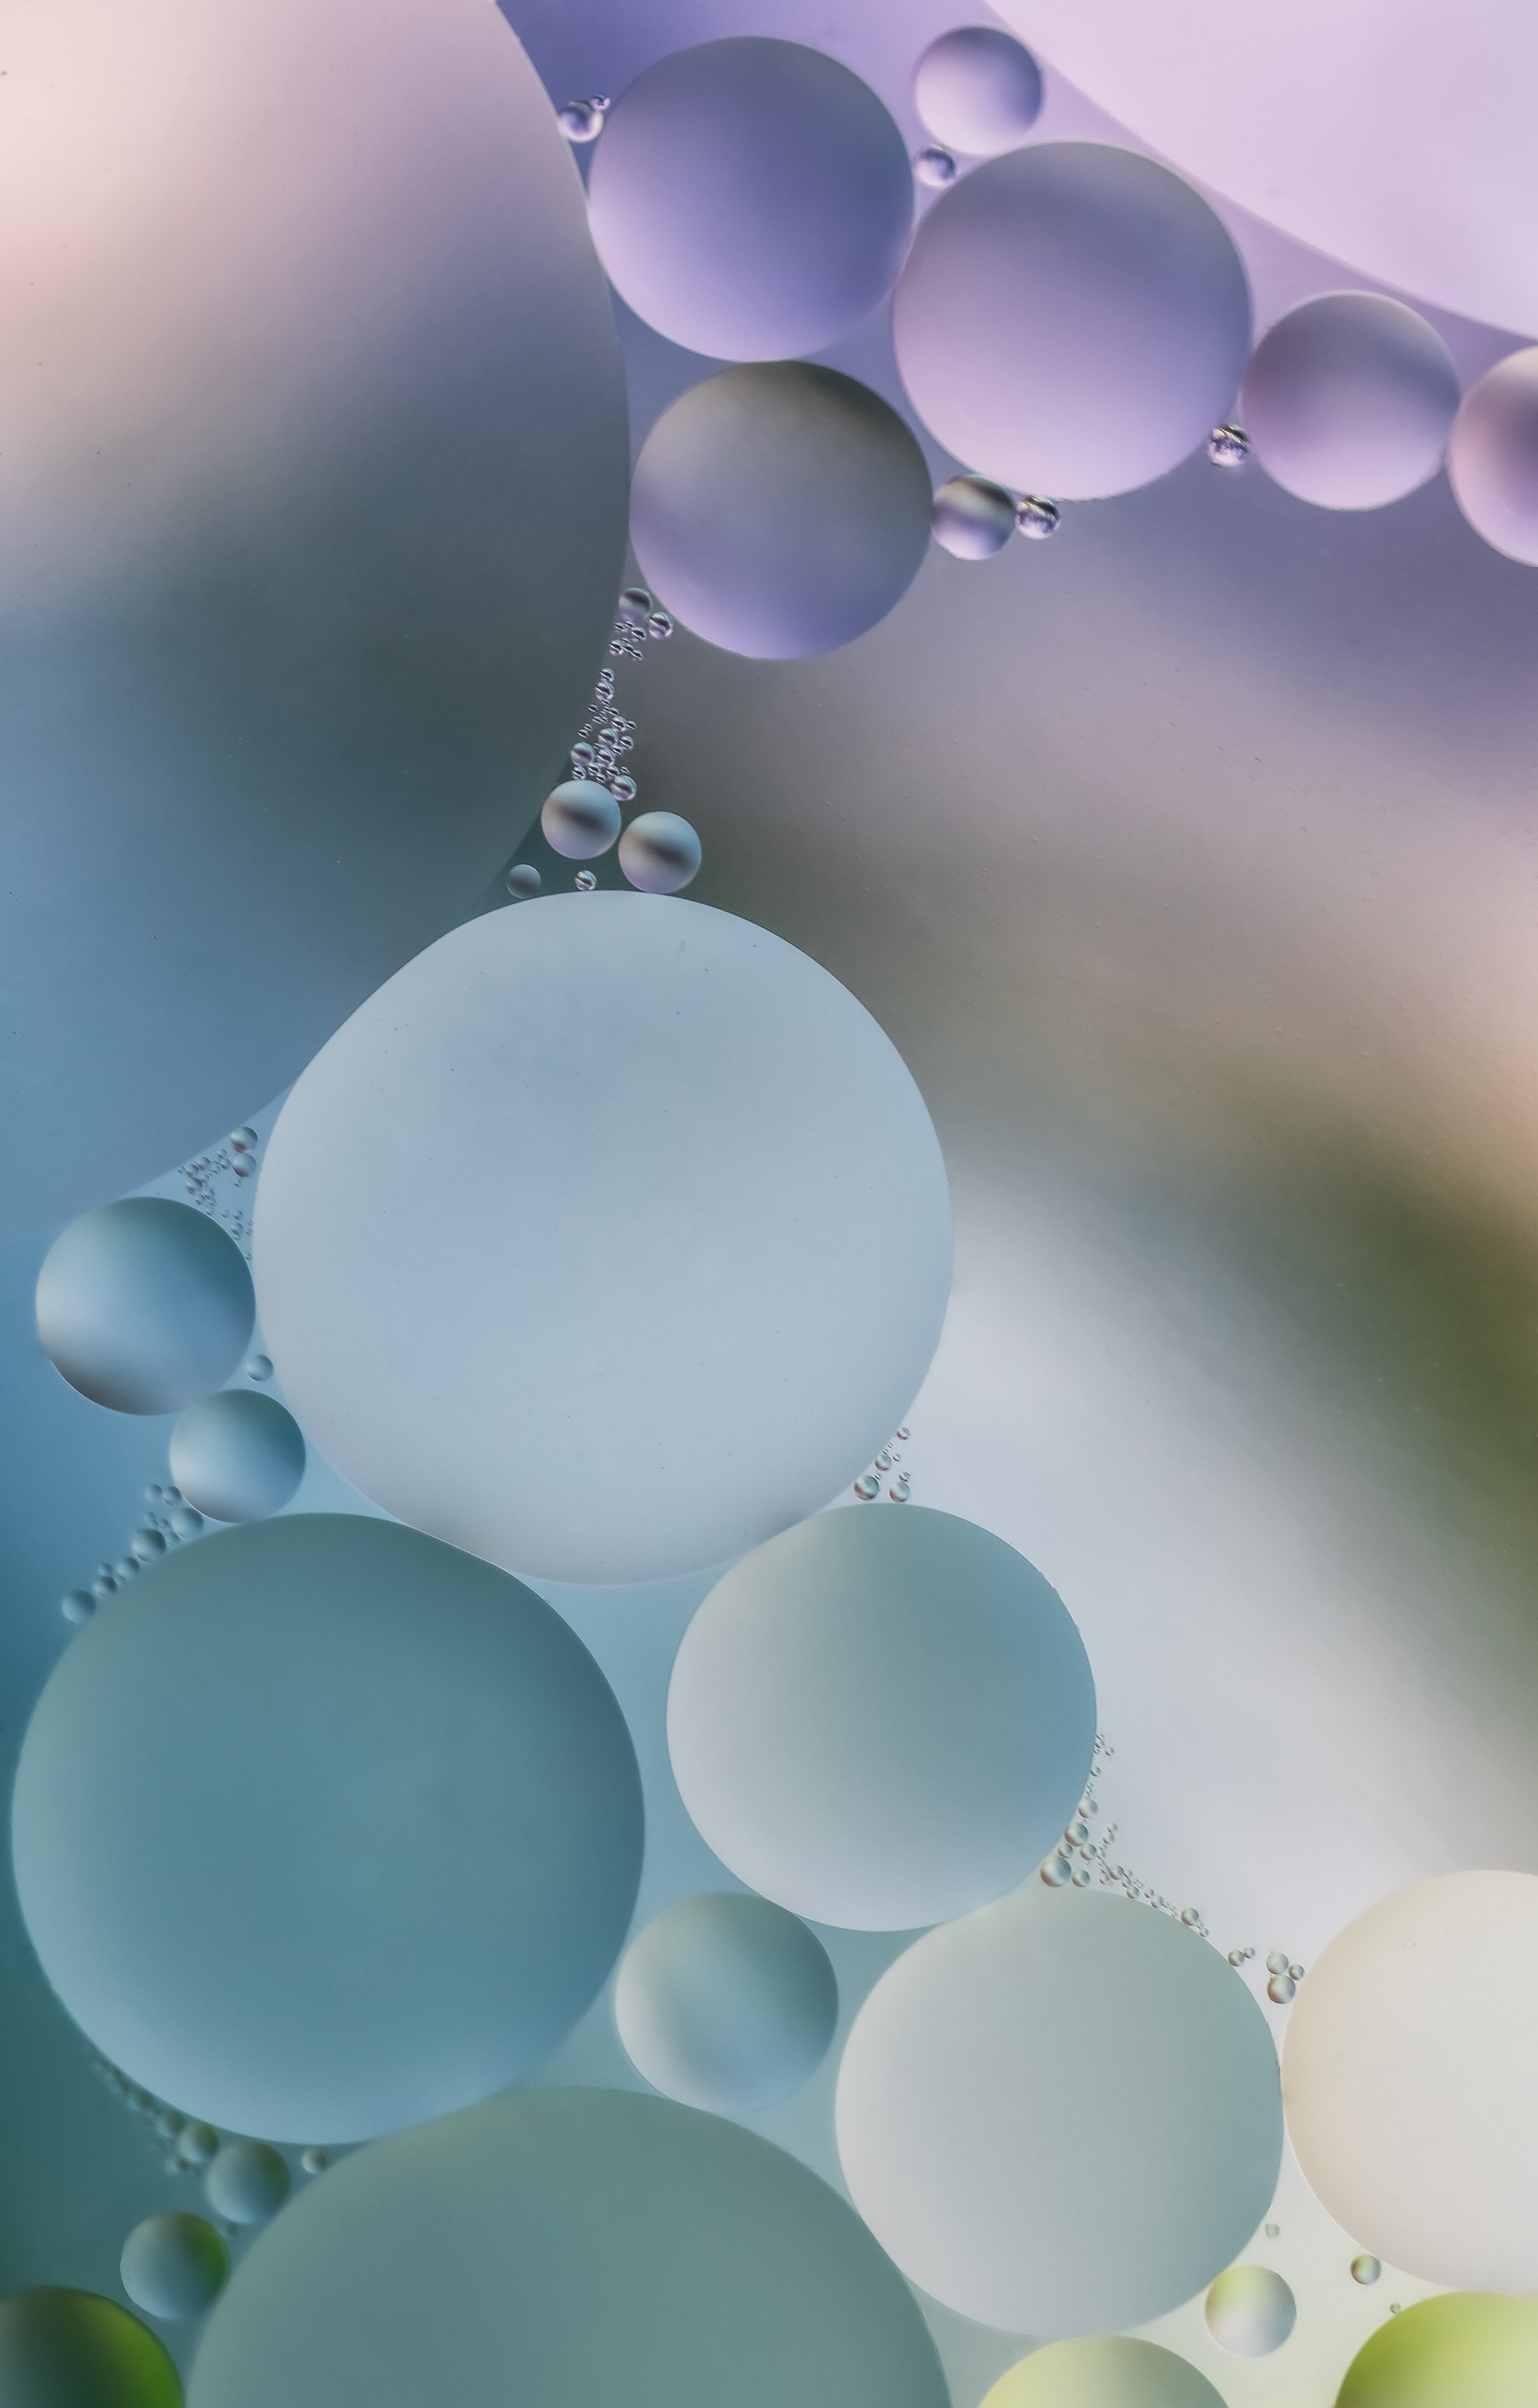 bubbles, liquid, water, faded, abstract